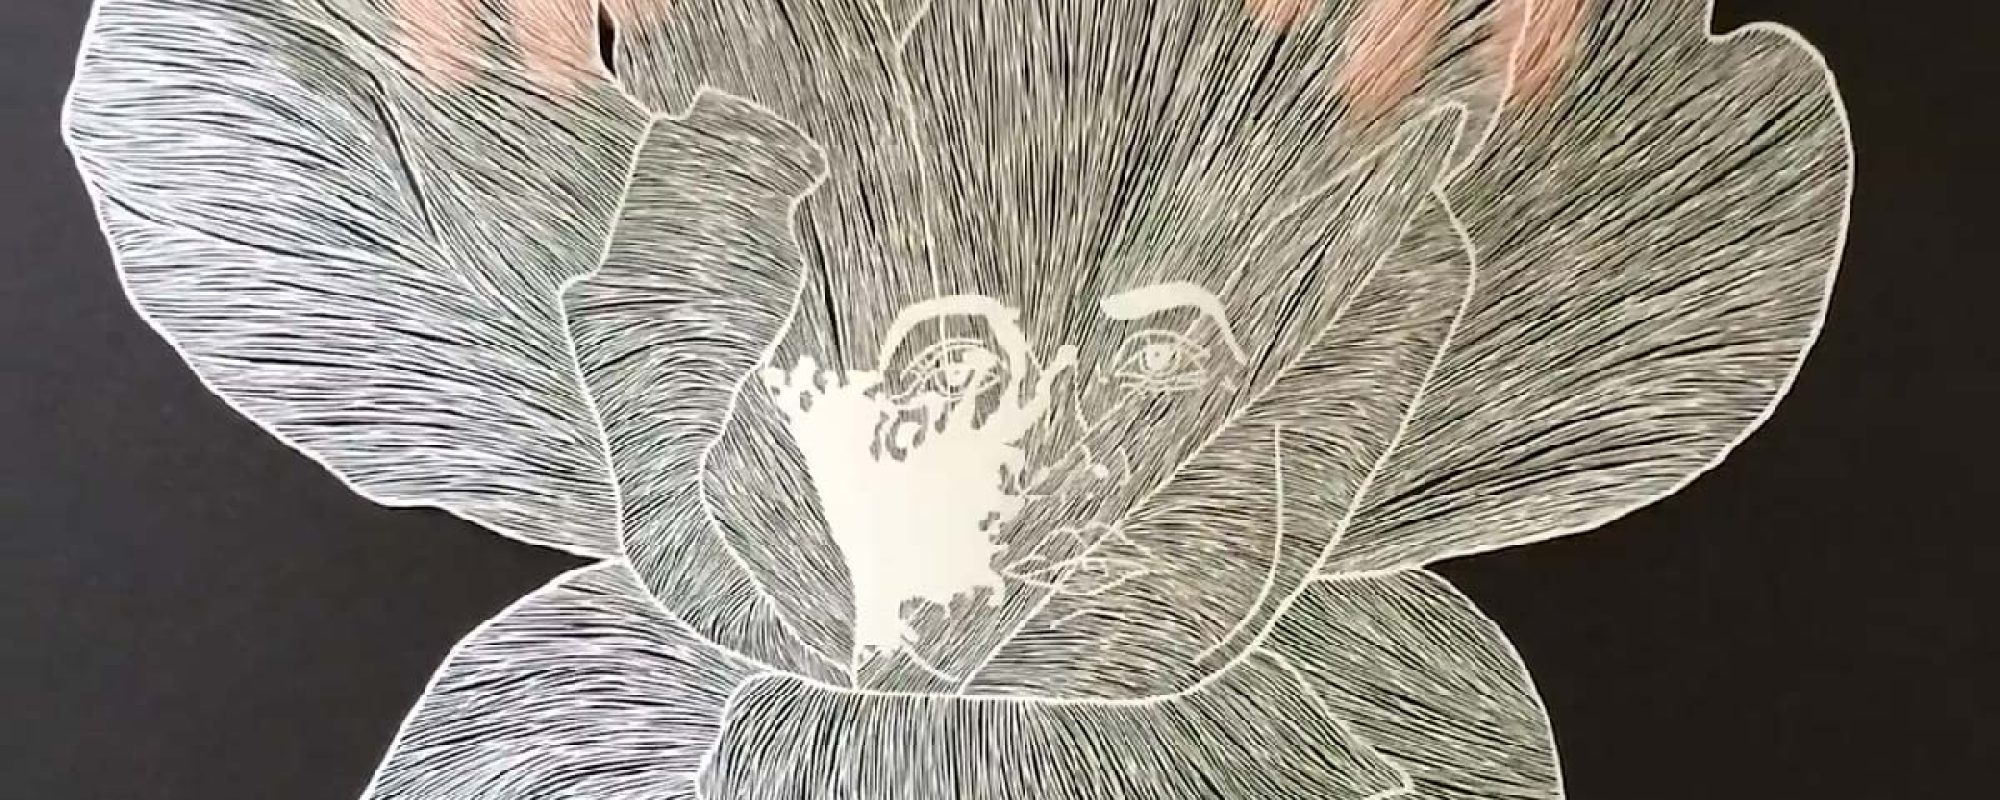 Maude White Makes Paper Cutting Masterpieces